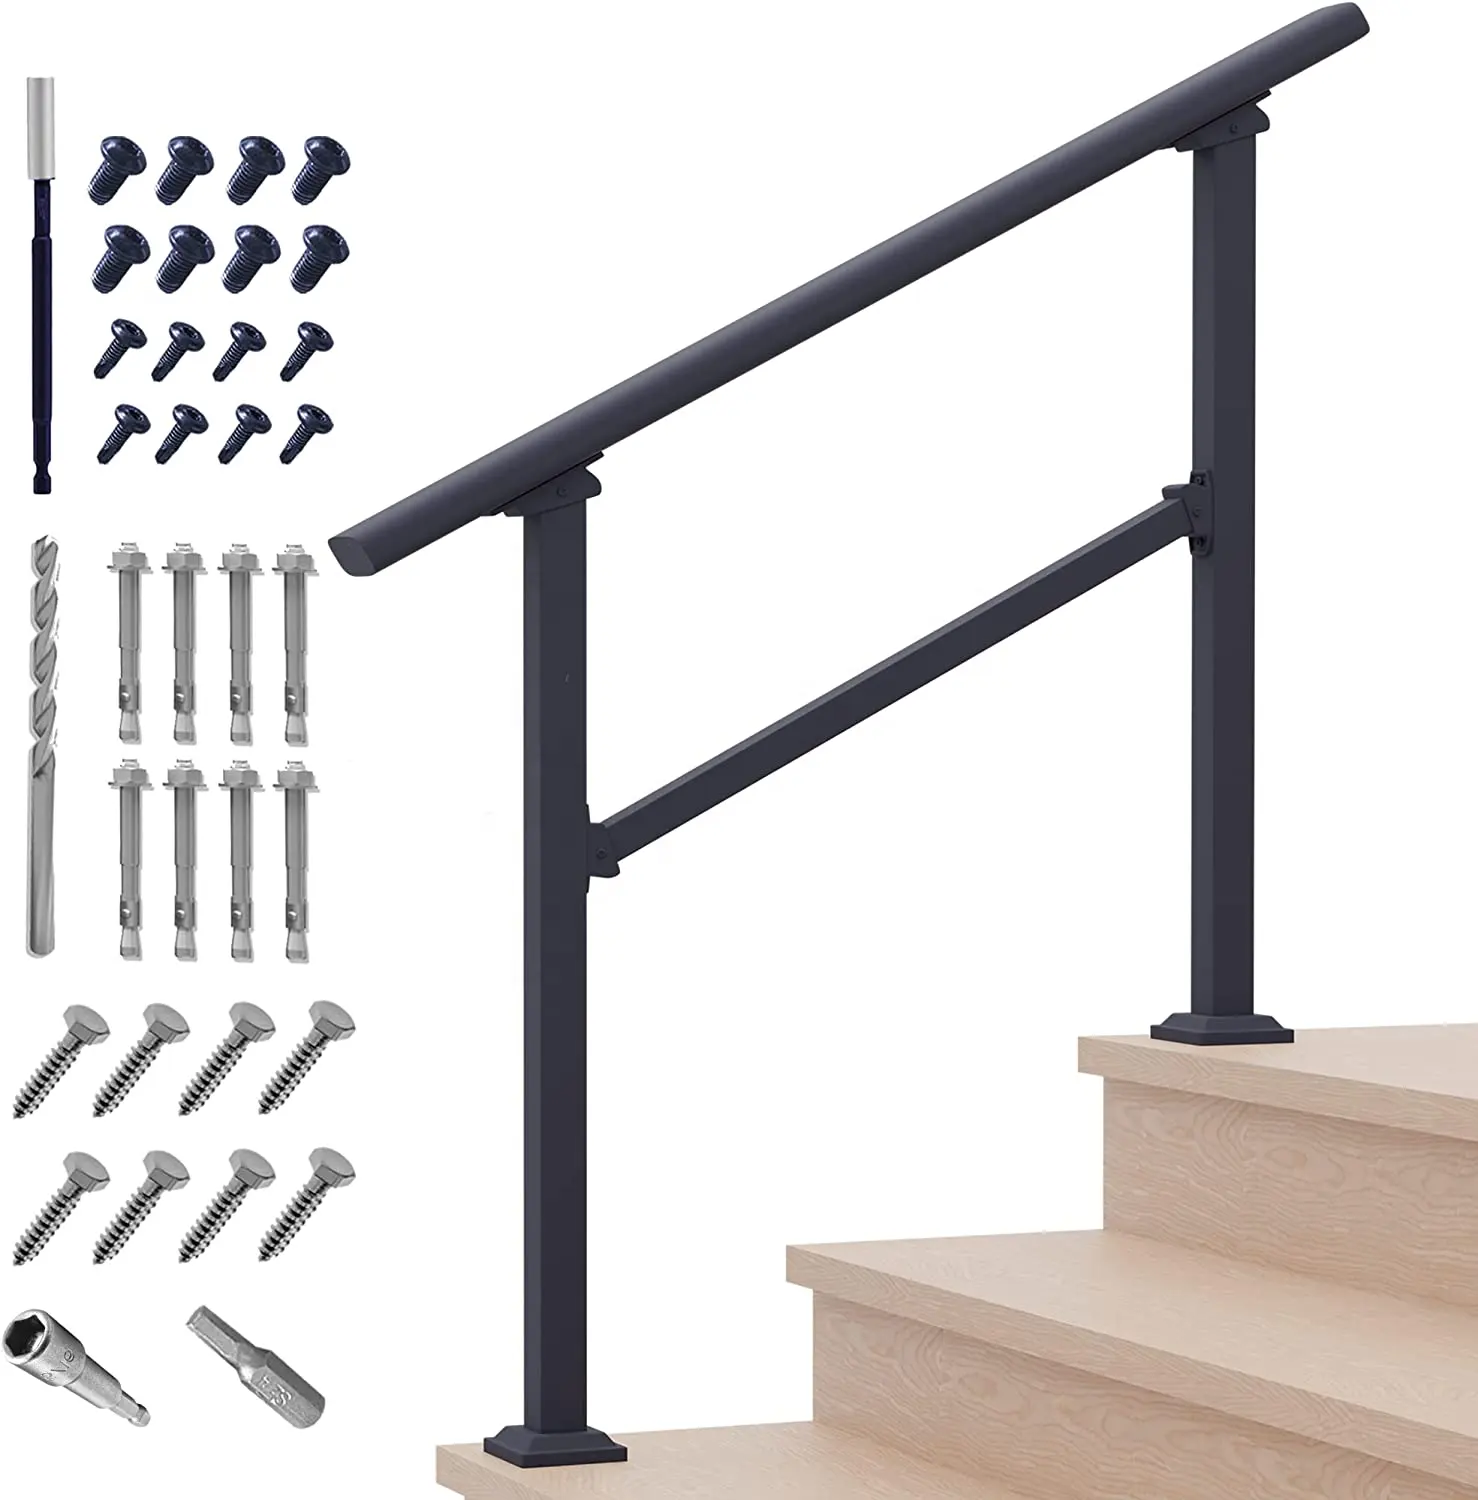 FACTORY Price Direct Sale Outdoor 2-3 Steps Fits Black Wrought Iron Handrail Kit Stair Railing balustrades & handrails